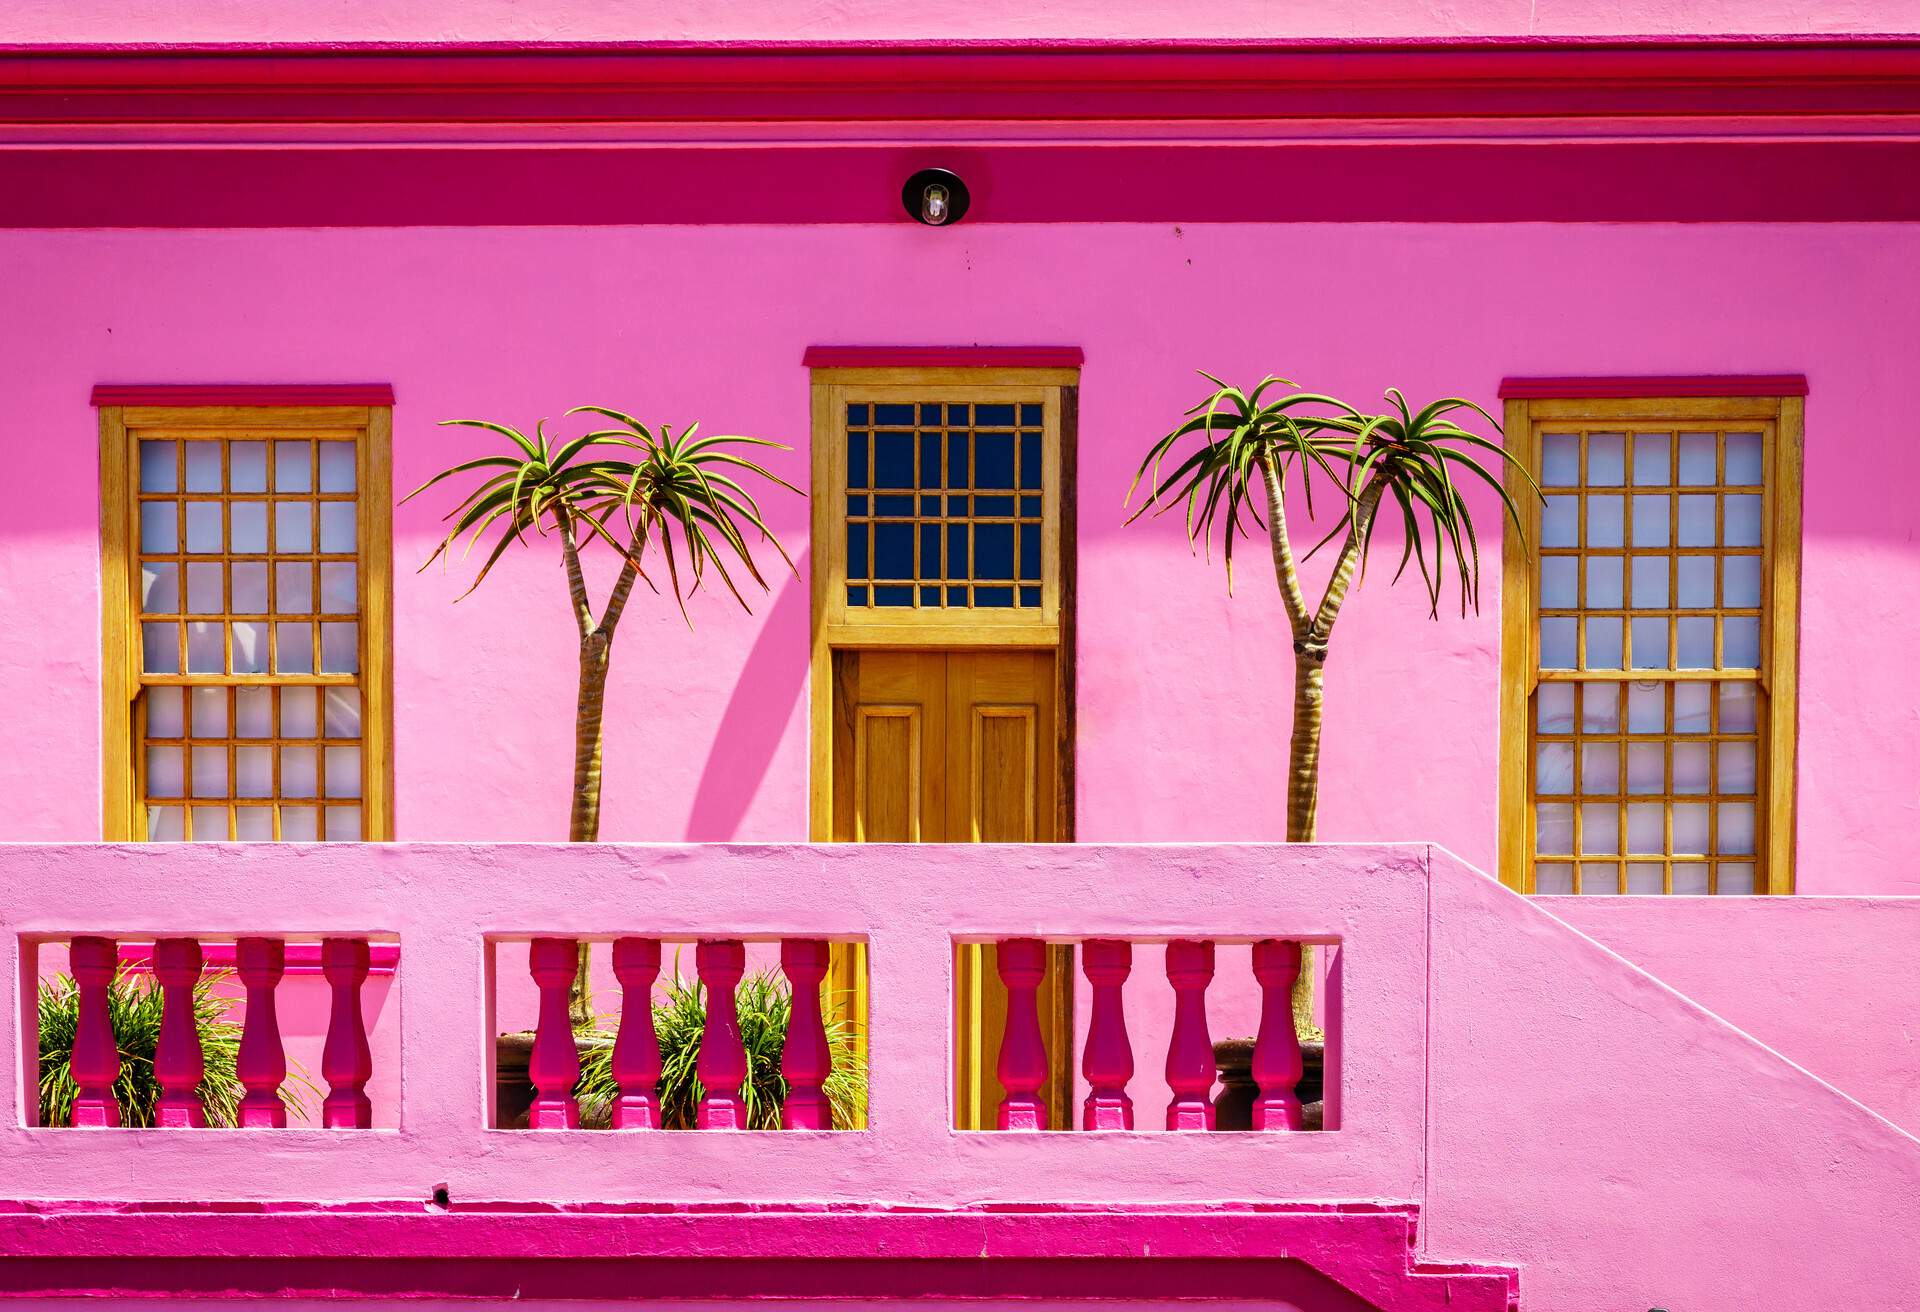 DEST_SOUTH-AFRICA_CAPE-TOWN_BO-KAAP_GettyImages-1027228758